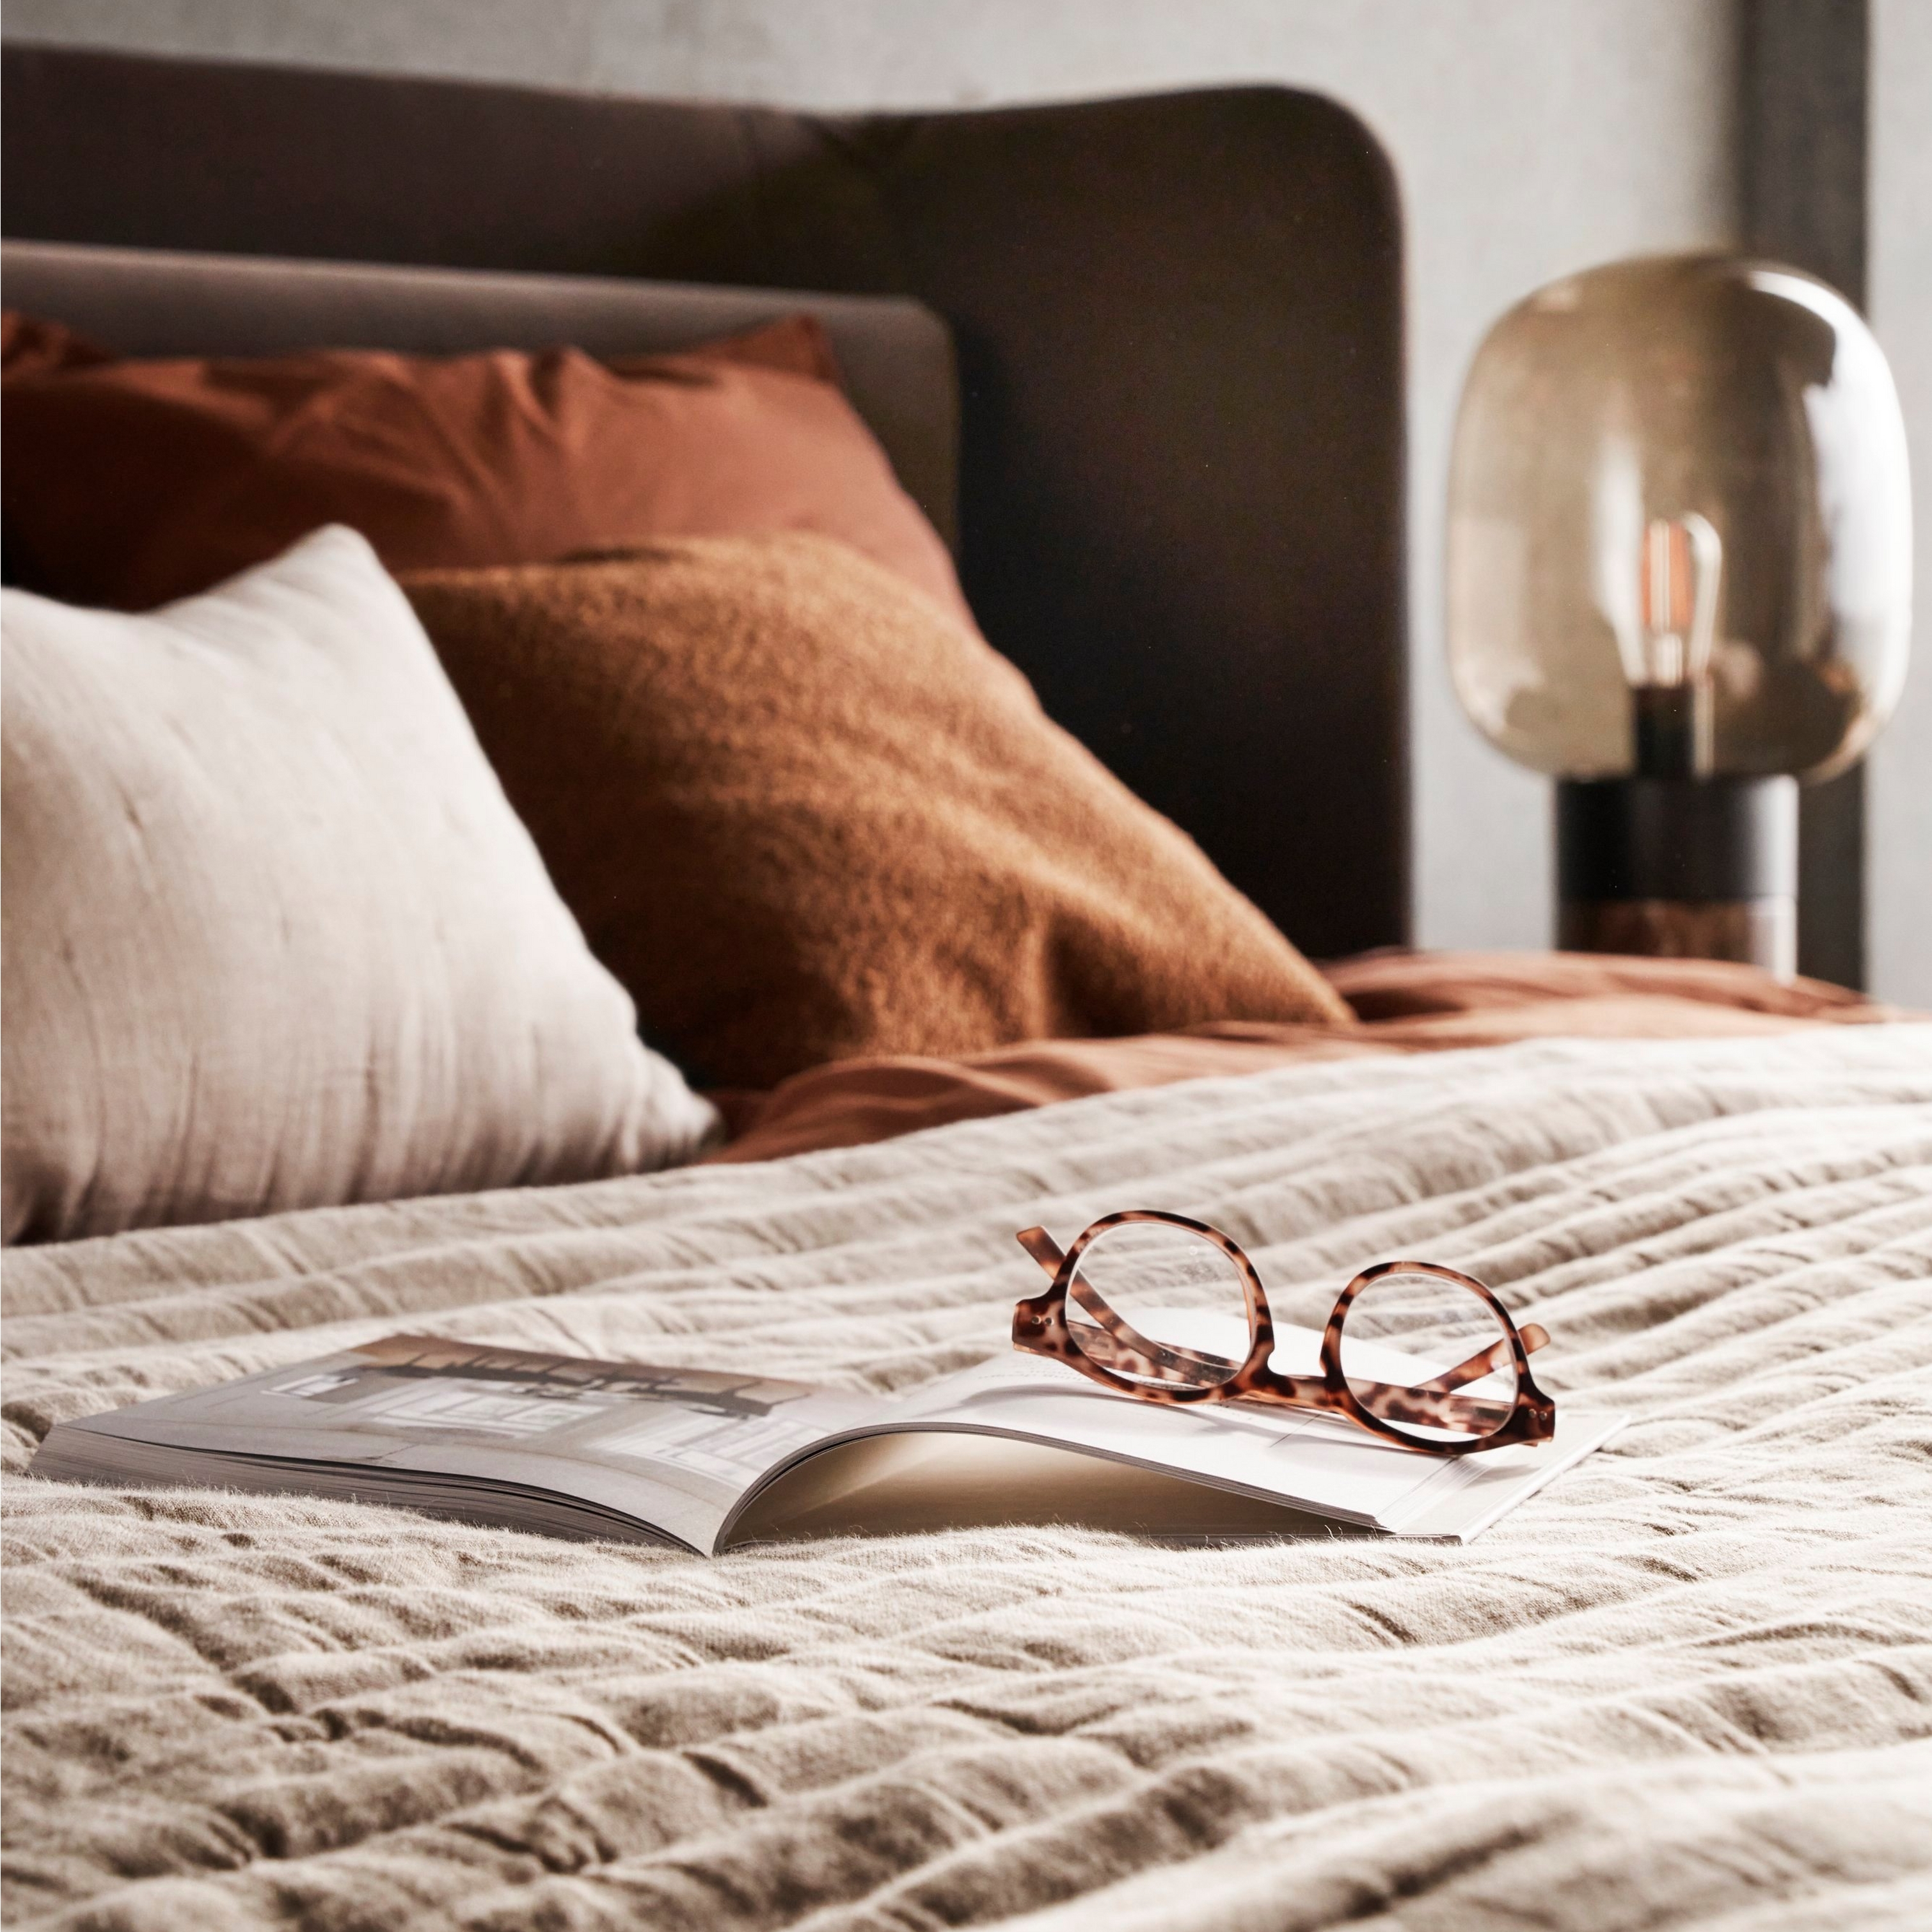 Bed with textured linens, glasses on open book and soft bedside lighting